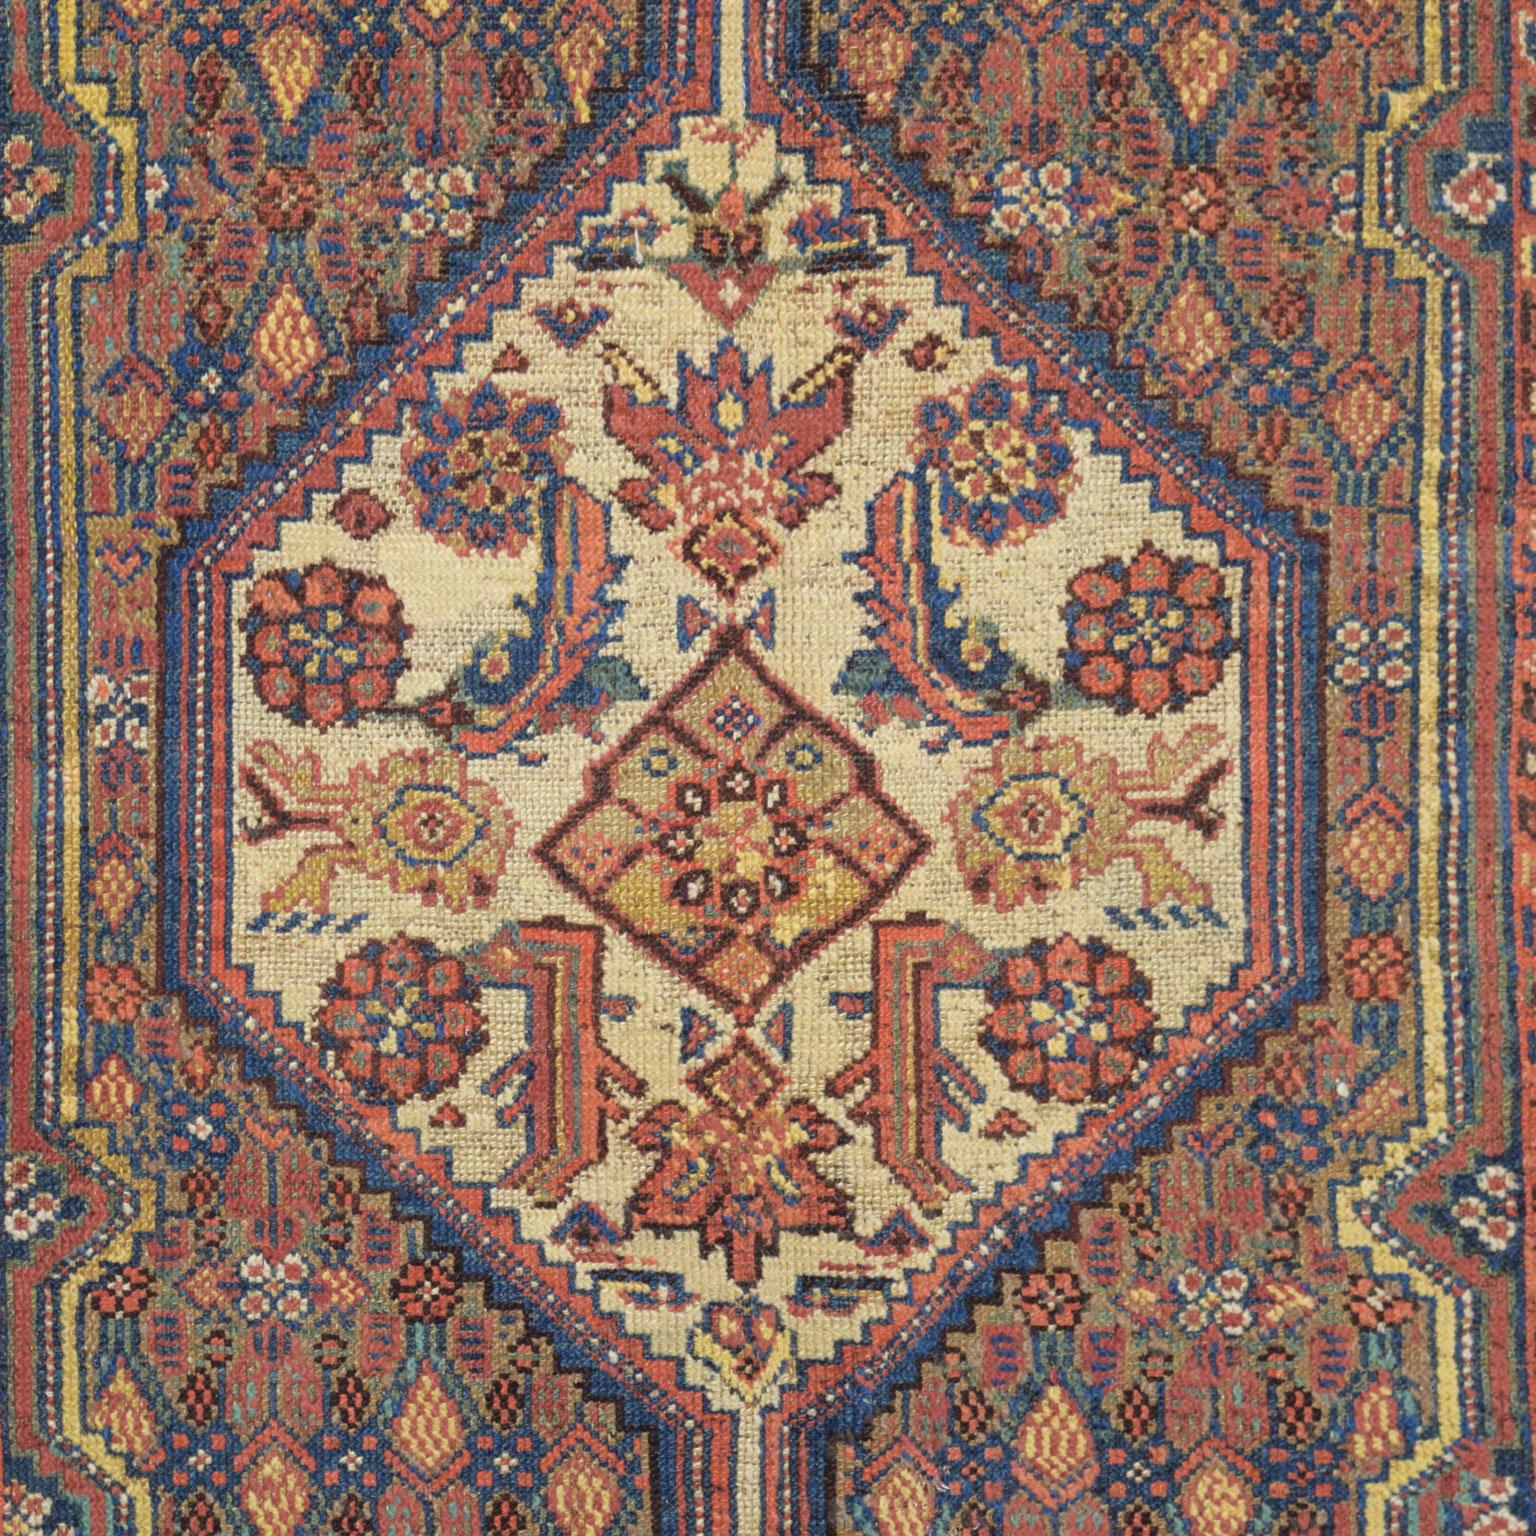 Tabriz Antique 1900s Wool Persian Saraband Rug, Blue, Red, and Orange, 5' x 7' For Sale